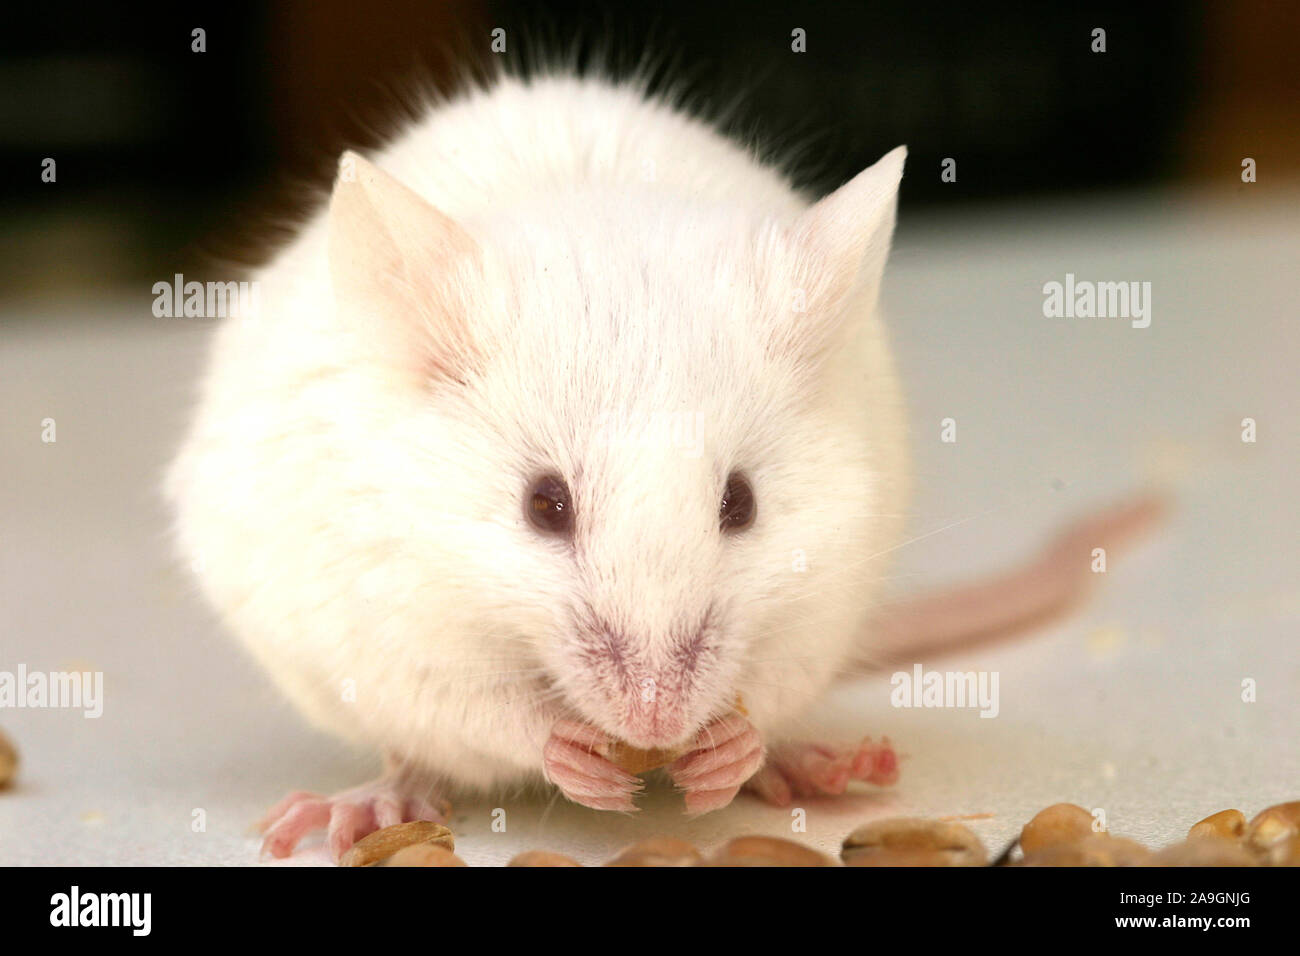 Weisse Maus beim Fressen - white mouse by eating Stock Photo